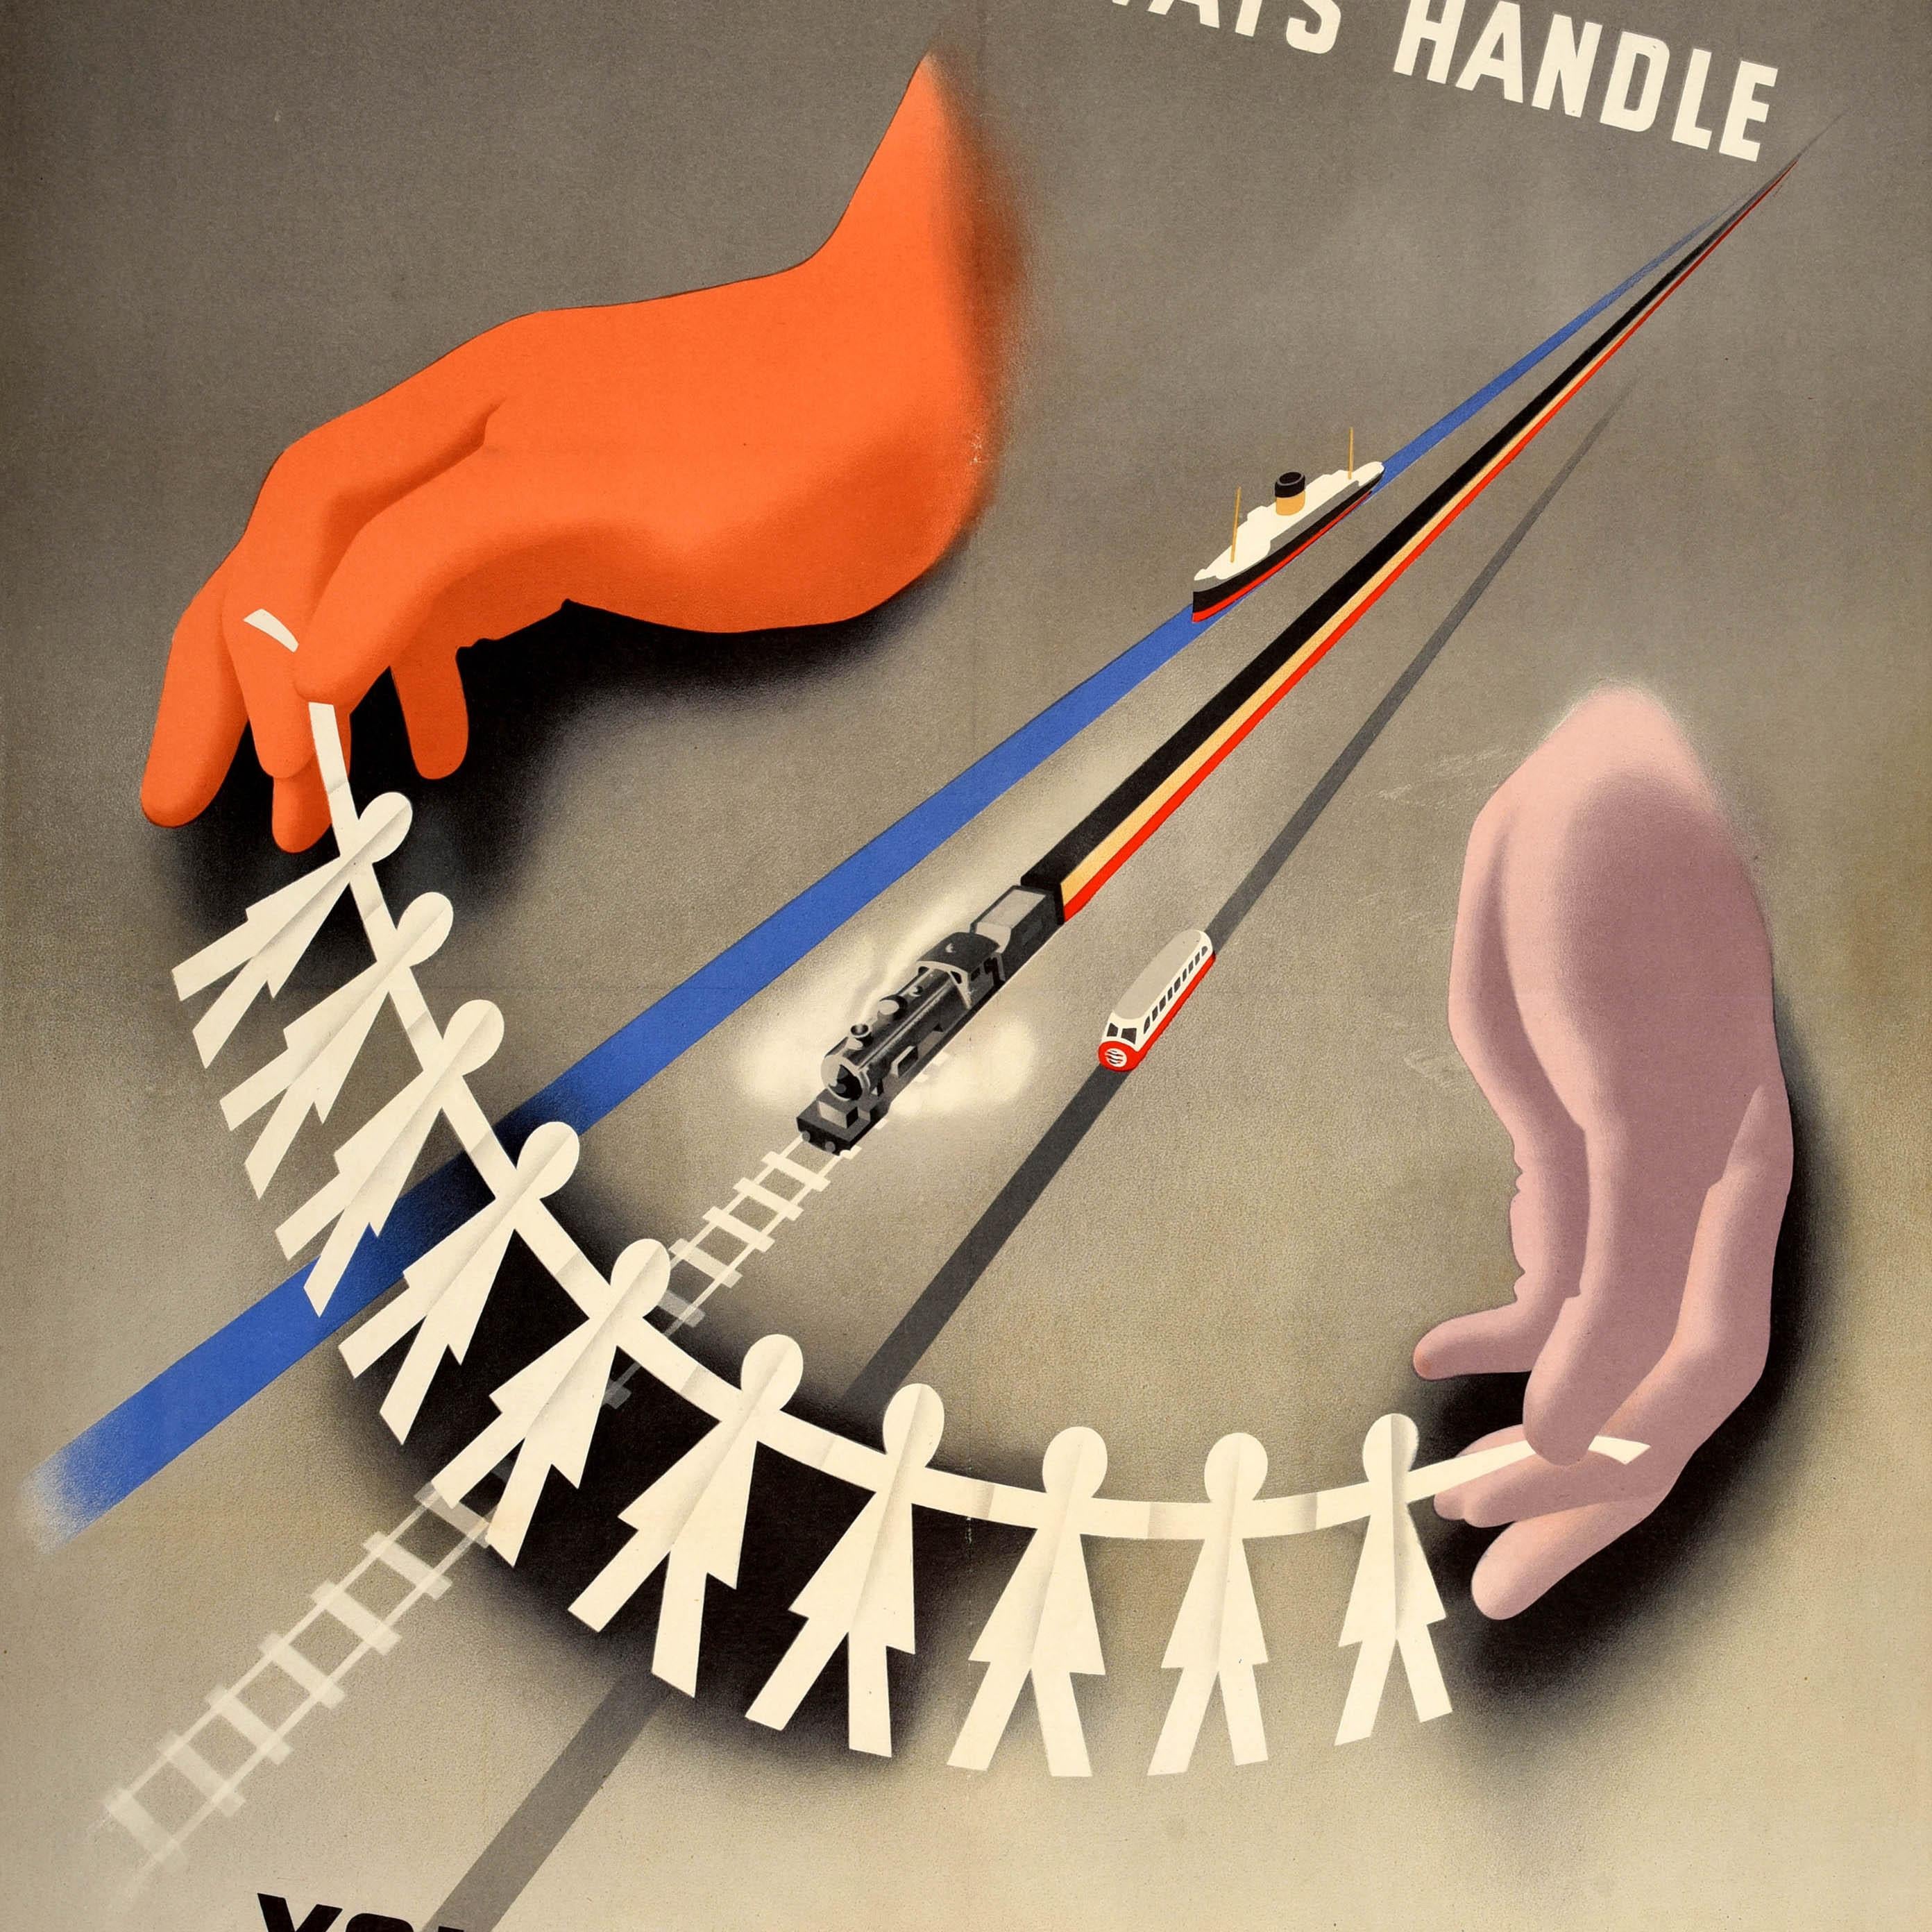 Original Vintage Travel Advertising Poster British Railways Handle Party Outing  - Print by Unknown